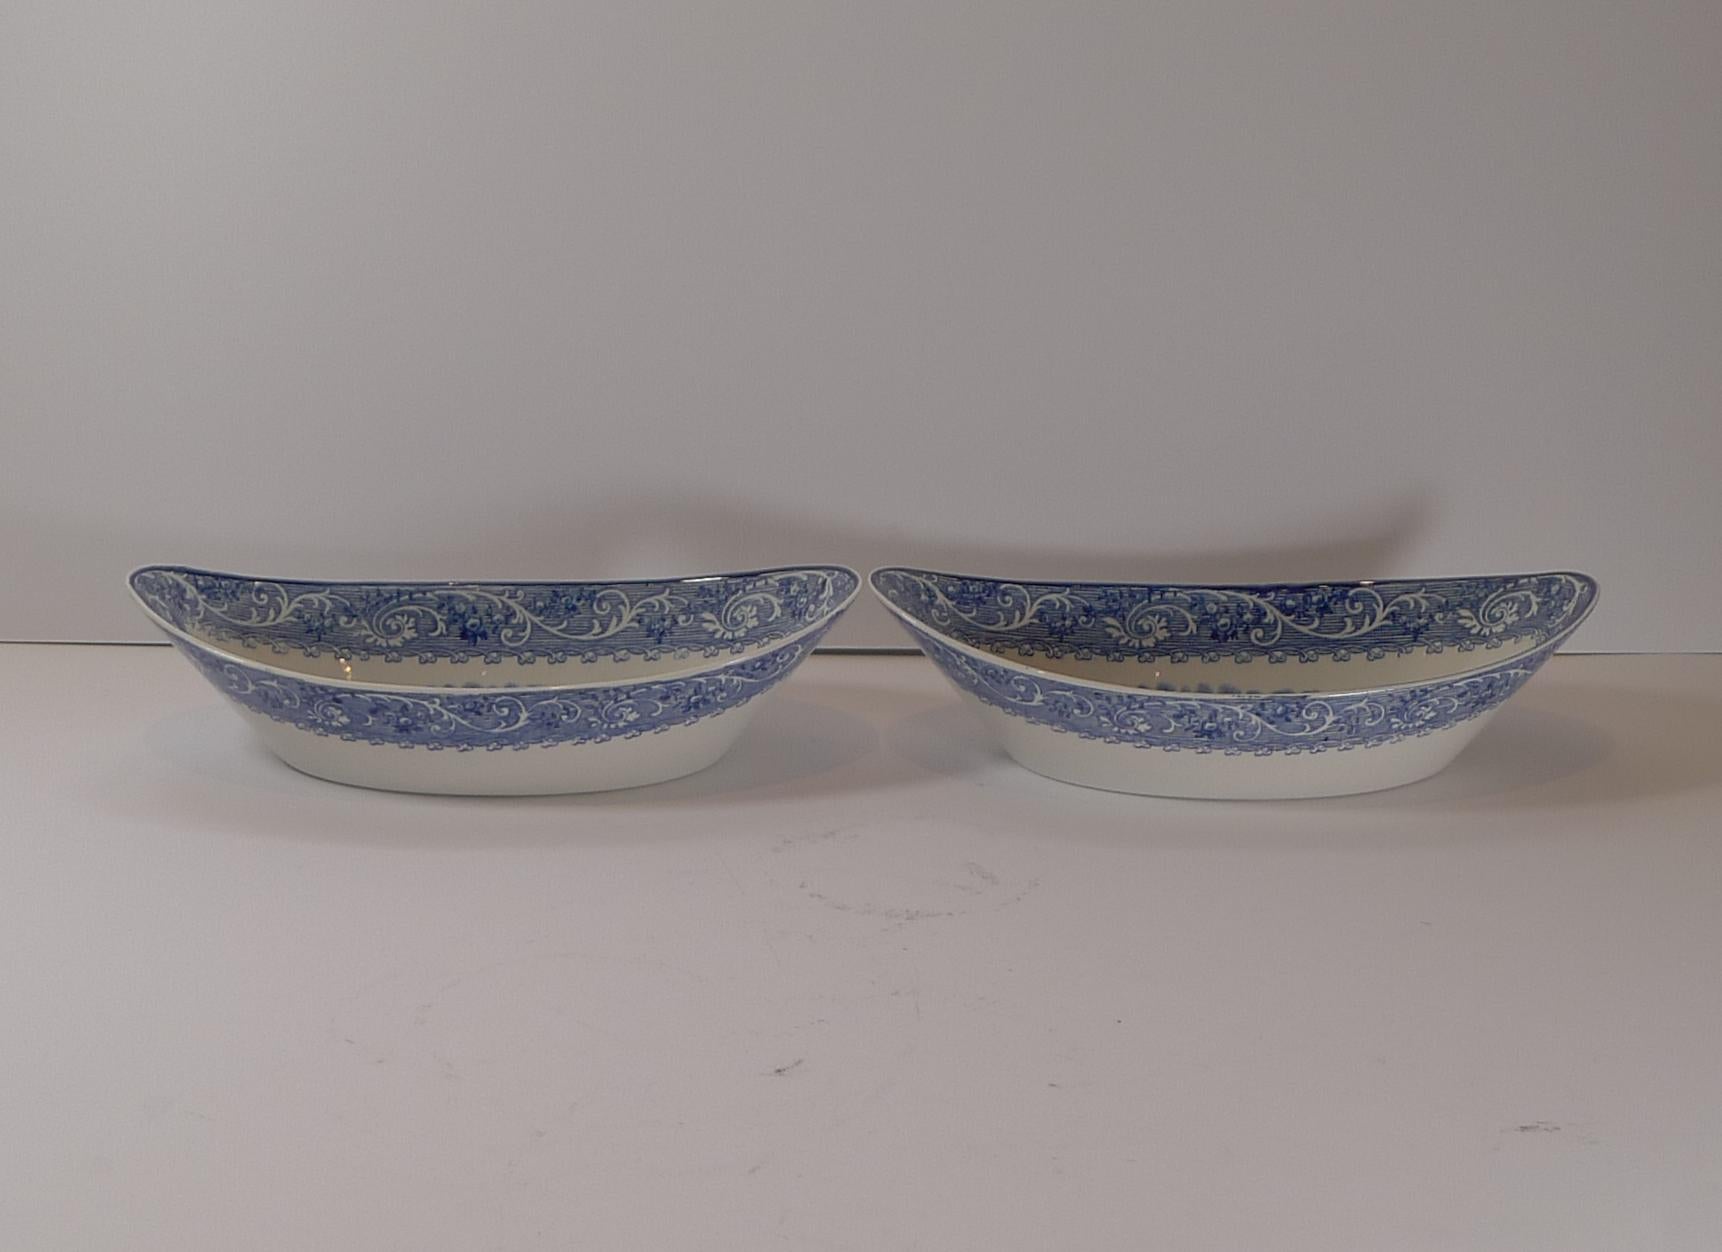 A most unusual pair of blue & white Ridgway bowls in the ever-popular 